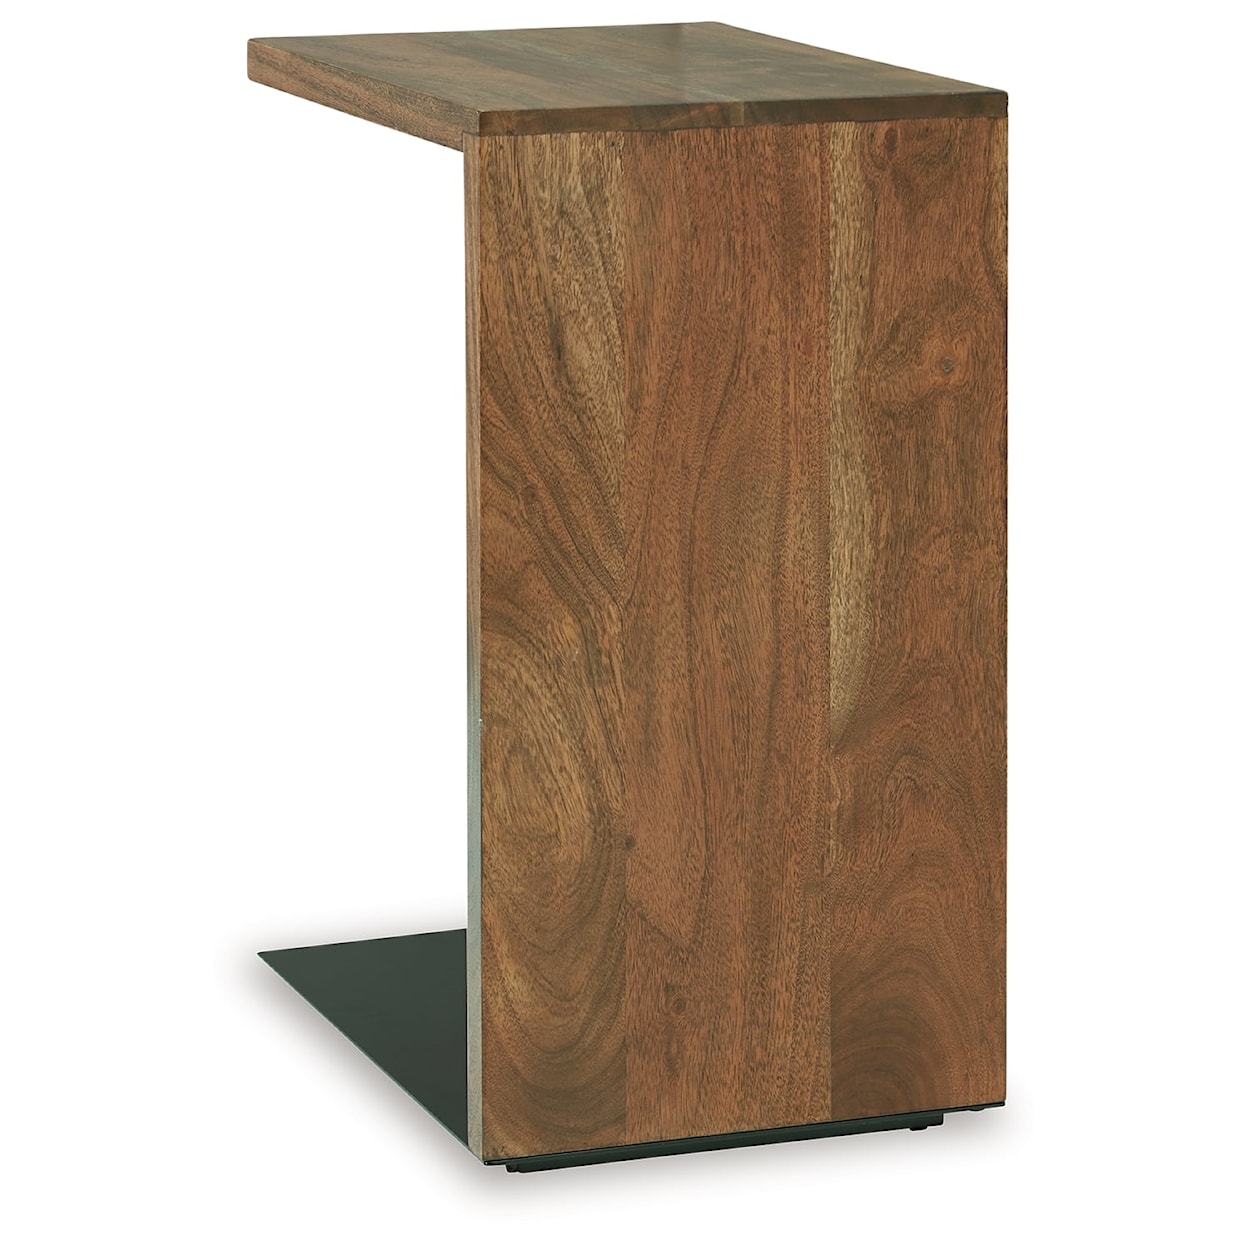 Ashley Signature Design Wimshaw Accent Table